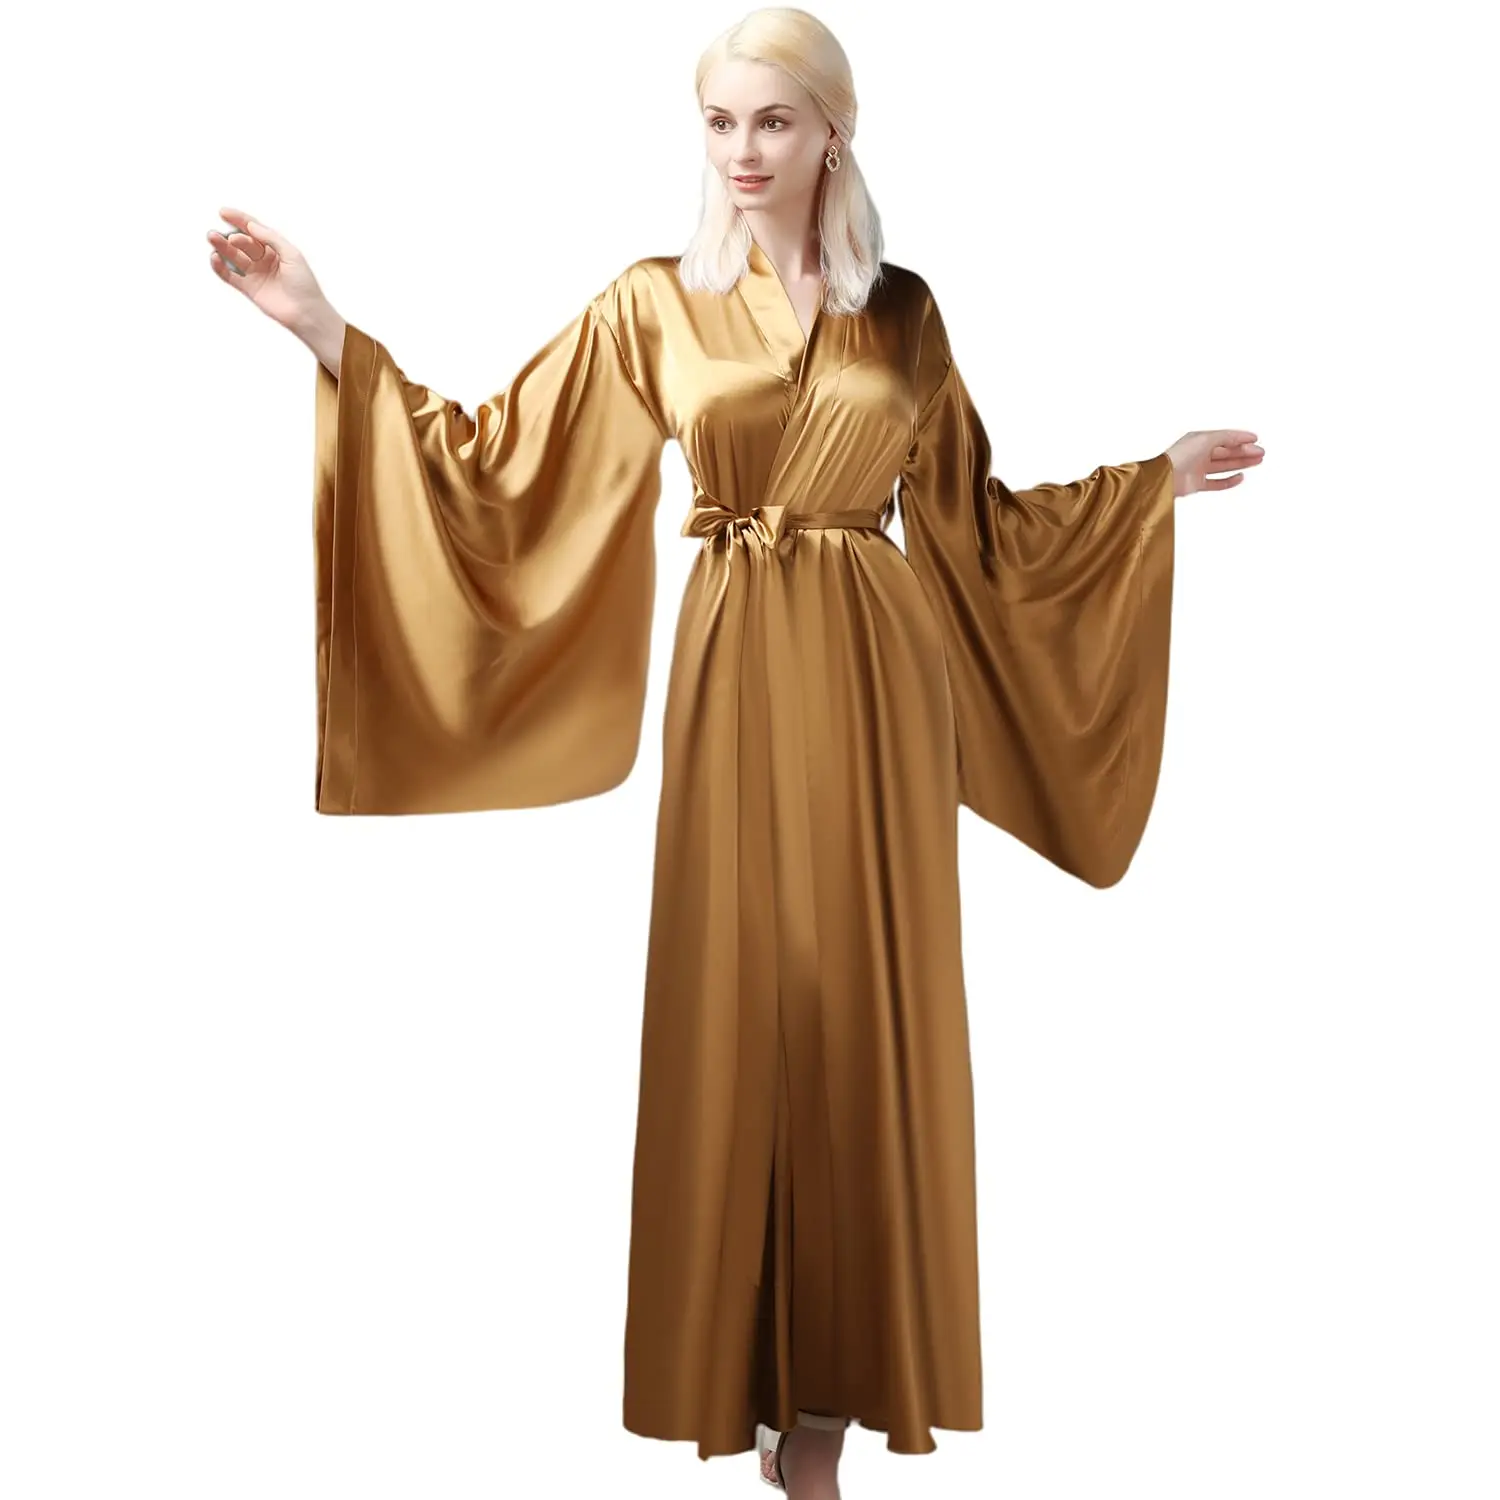 

Elegant Elastic Silk Like Satin Bath Robe For Women Gold Side Split Strap High Quality Nightgown Plus Size Same As The Picture